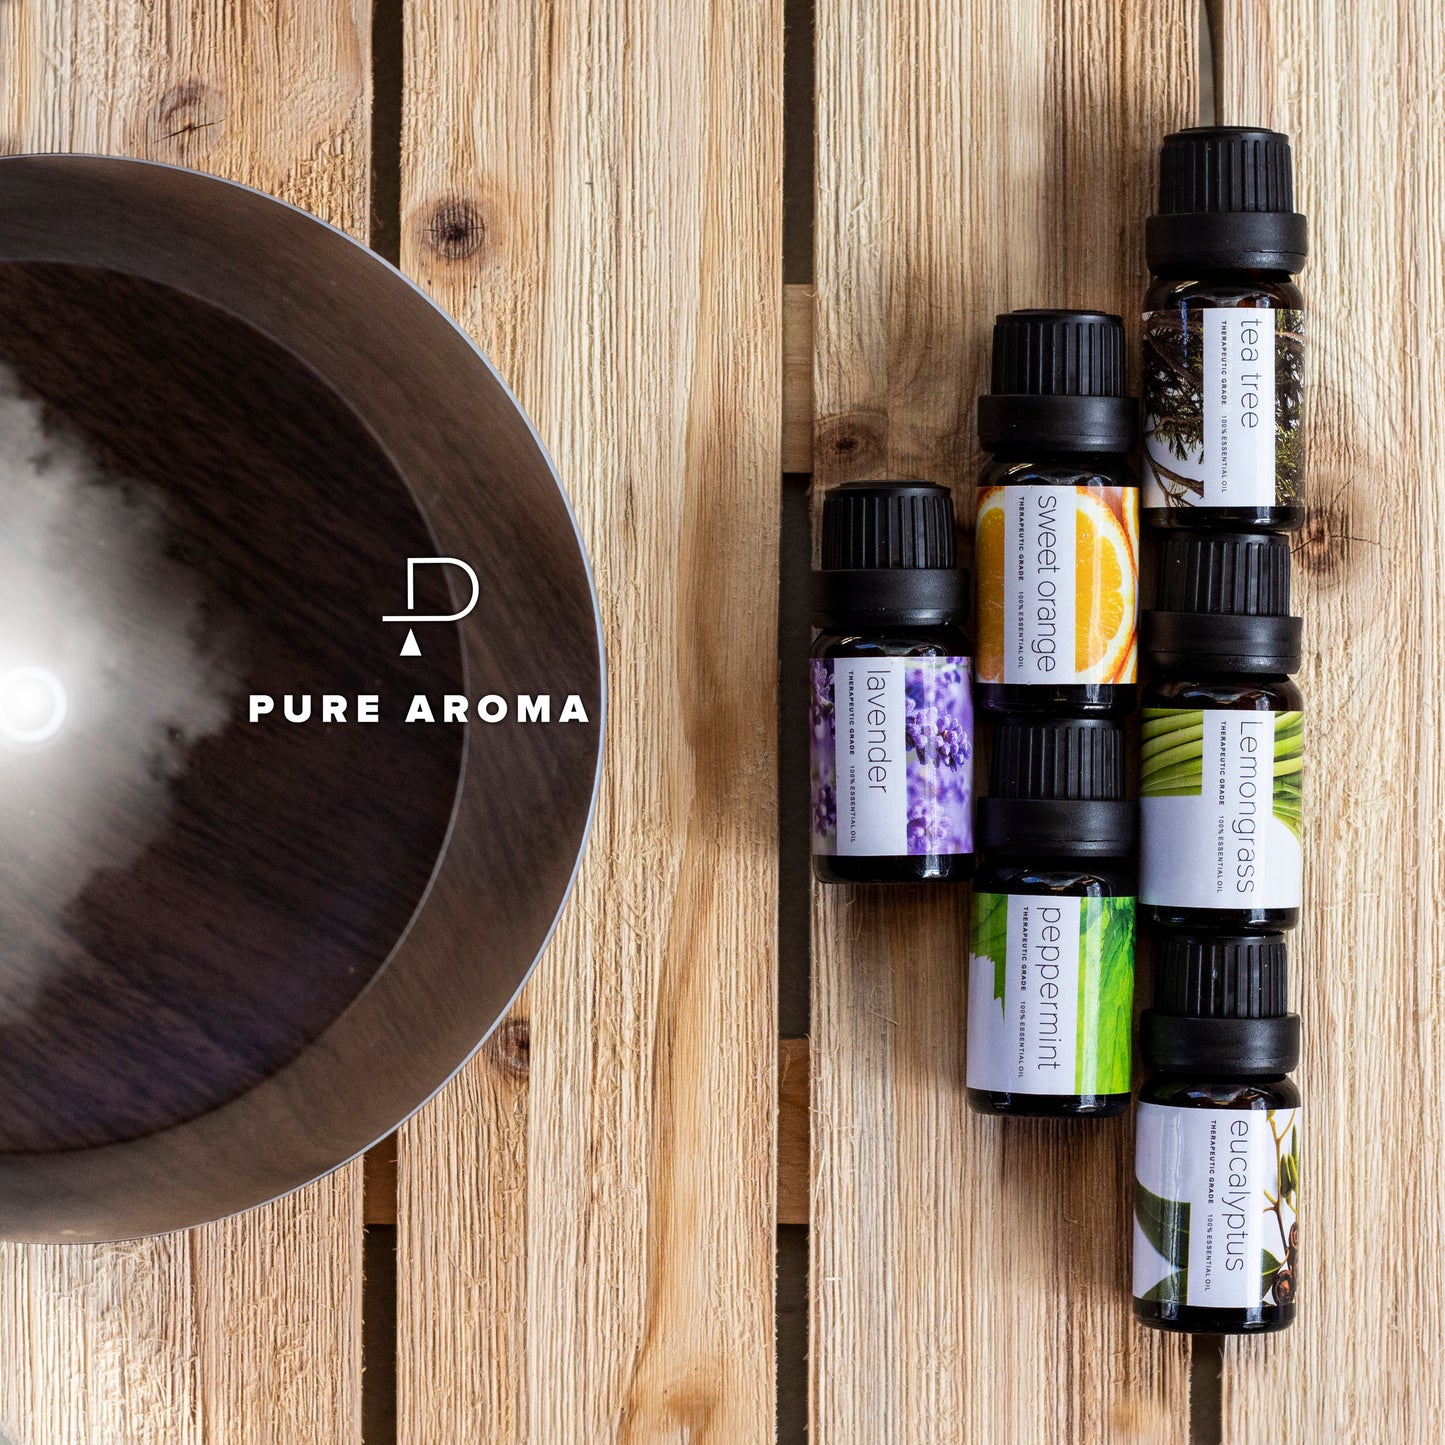 PURE AROMA Essential Oils - Top 6 Aromatherapy Oils in 1 Box (10 Ml)